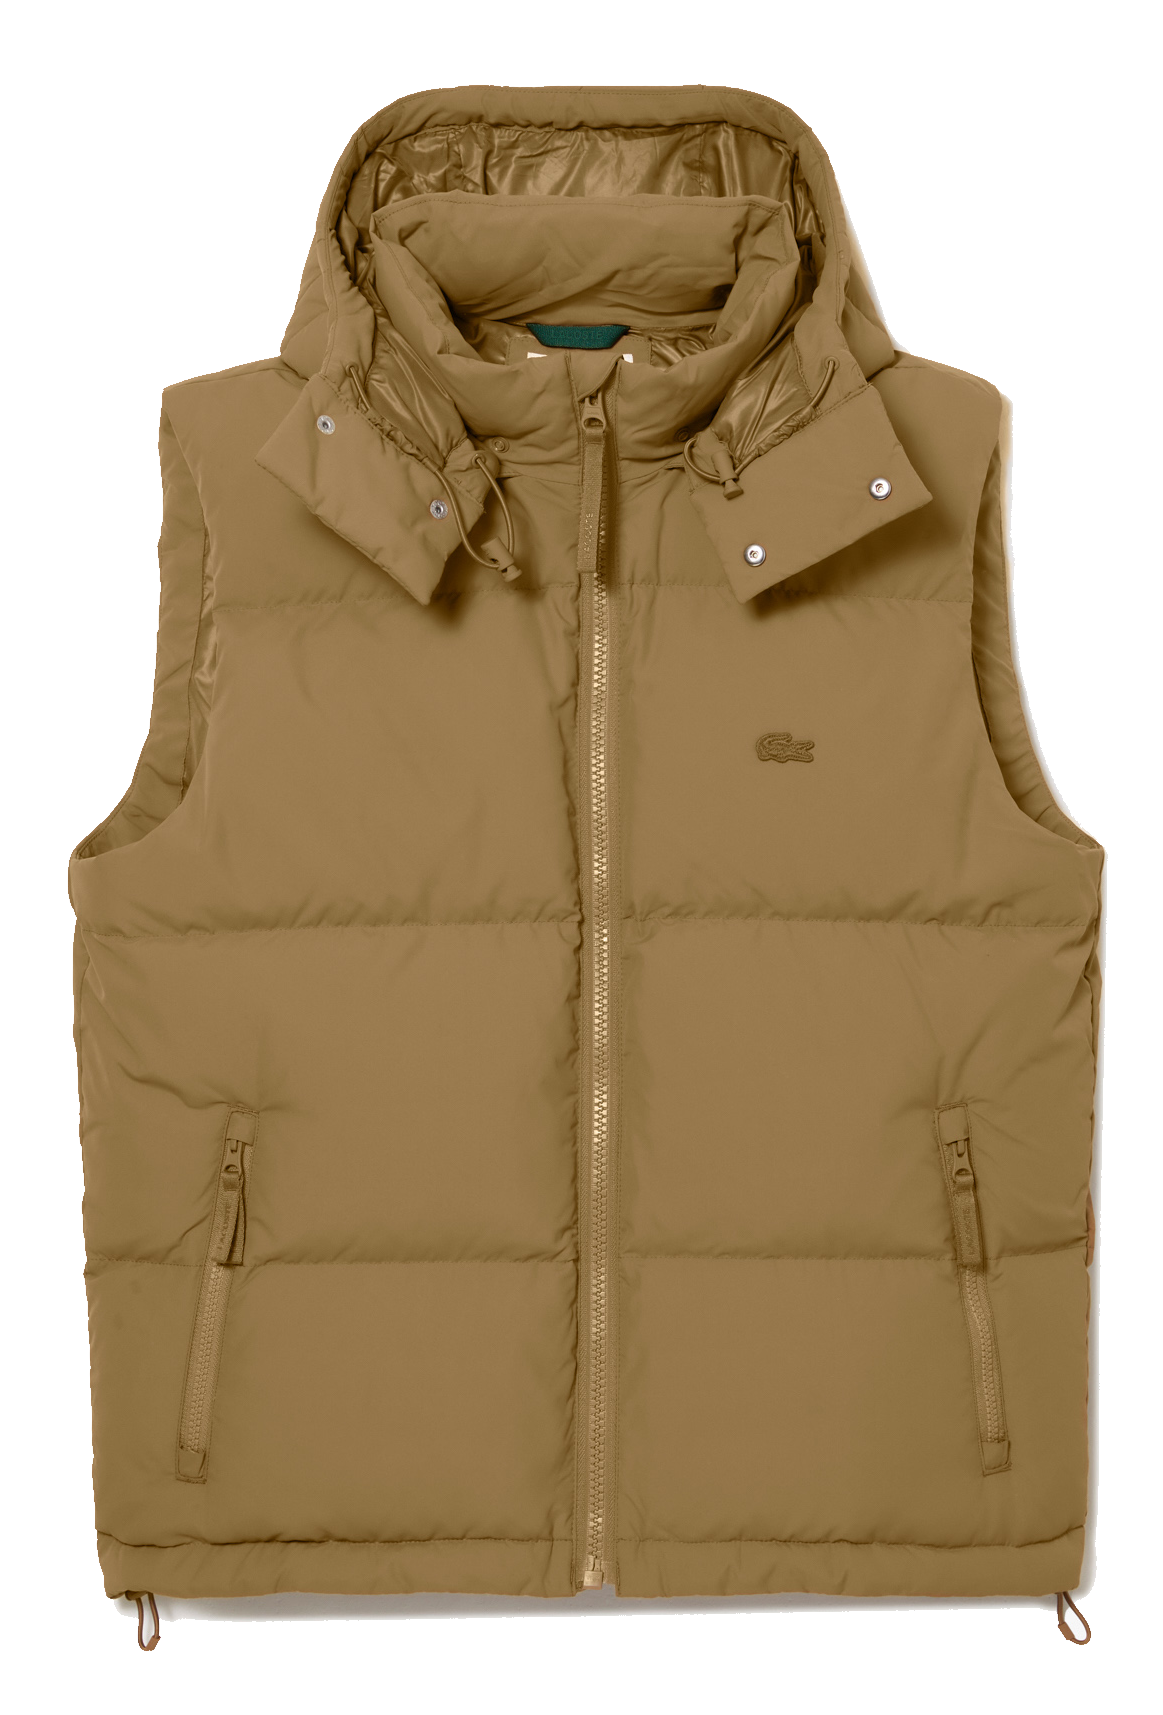 Lacoste Lacoste Padded Down Vest Crocodile Brown